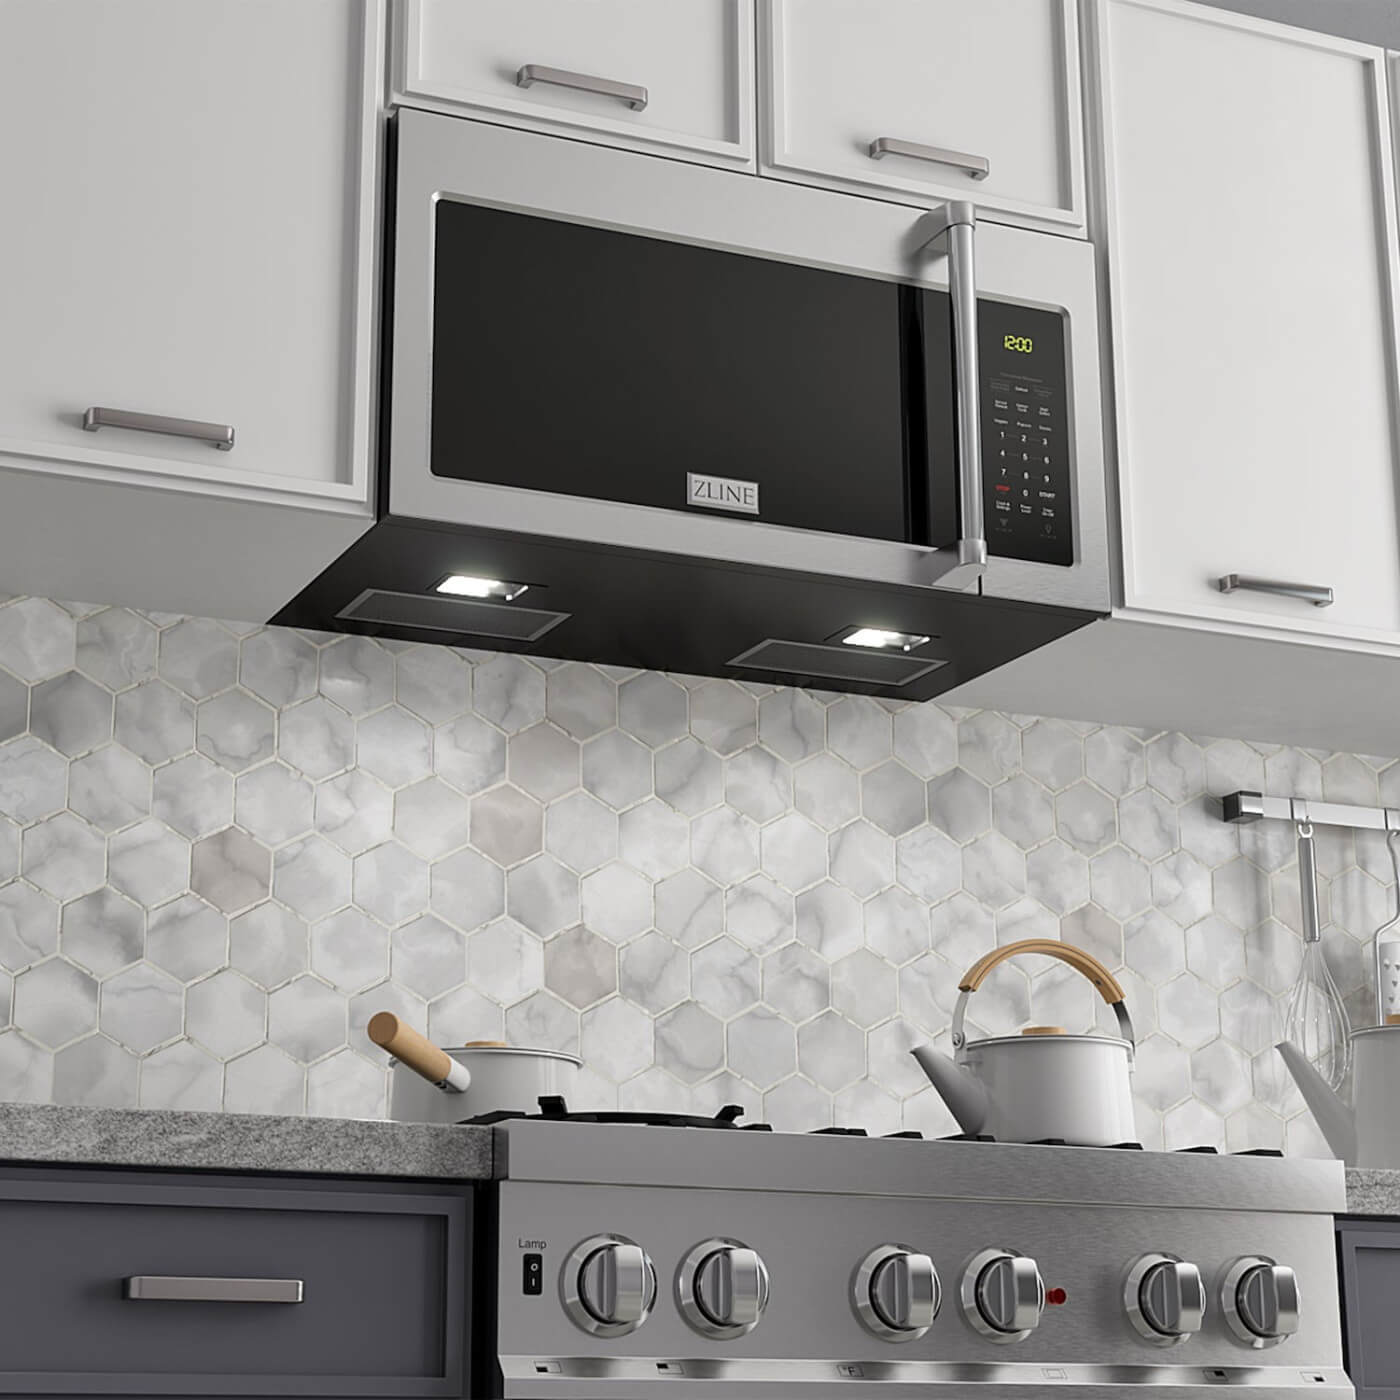 ZLINE Over-the-Range Microwave with cooktop lighting on in a farmhouse kitchen.